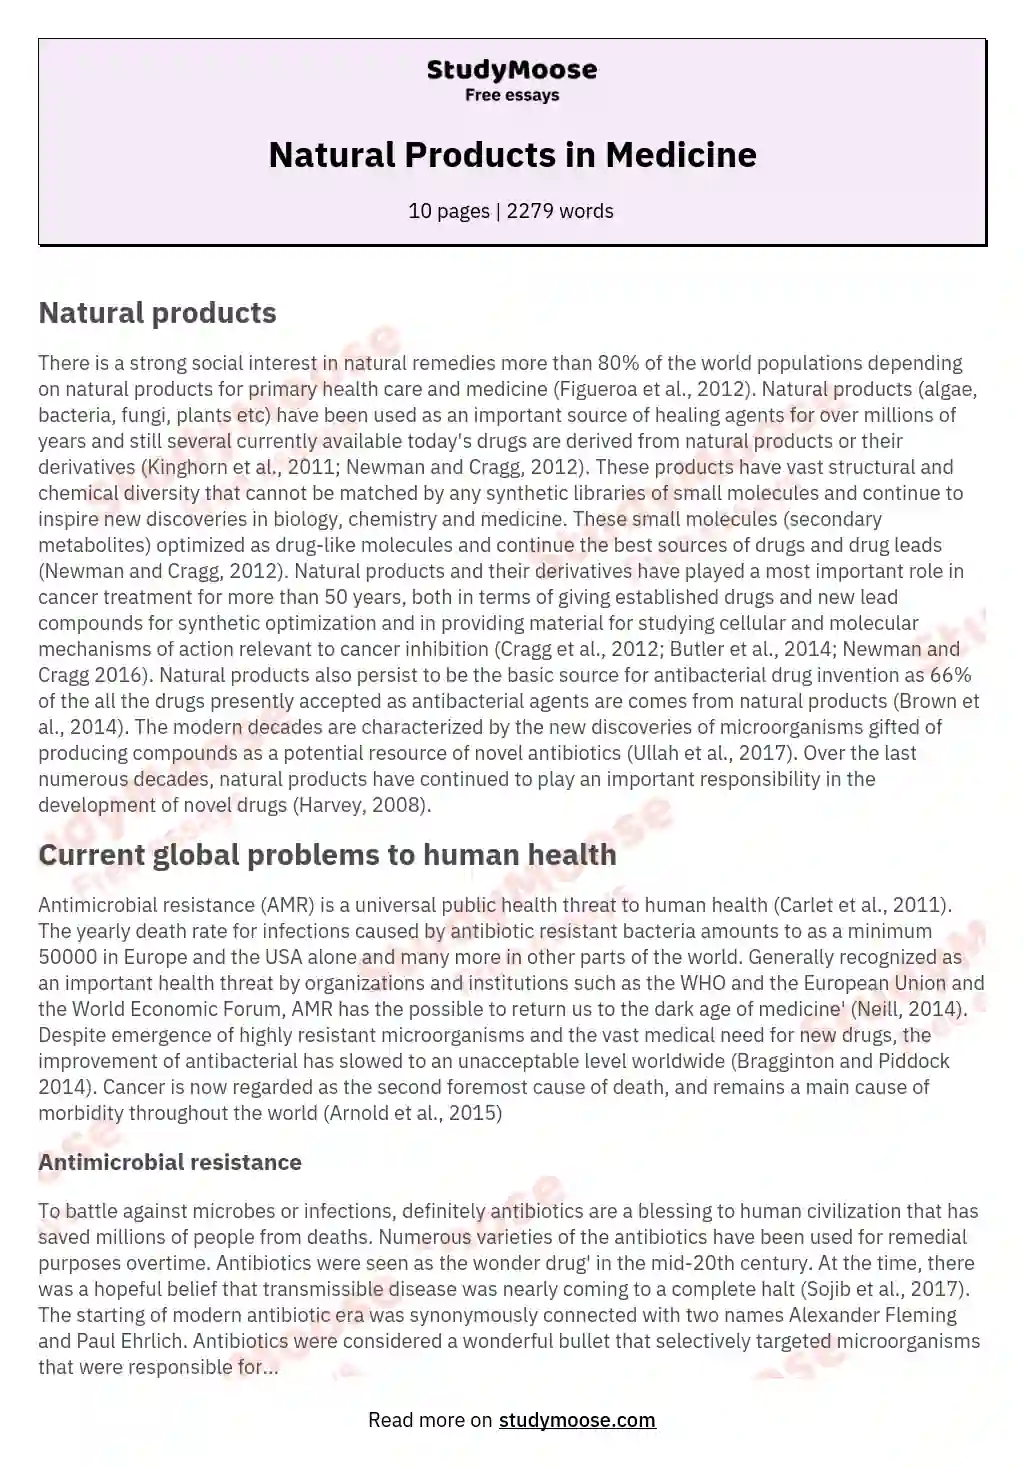 Natural Products in Medicine essay